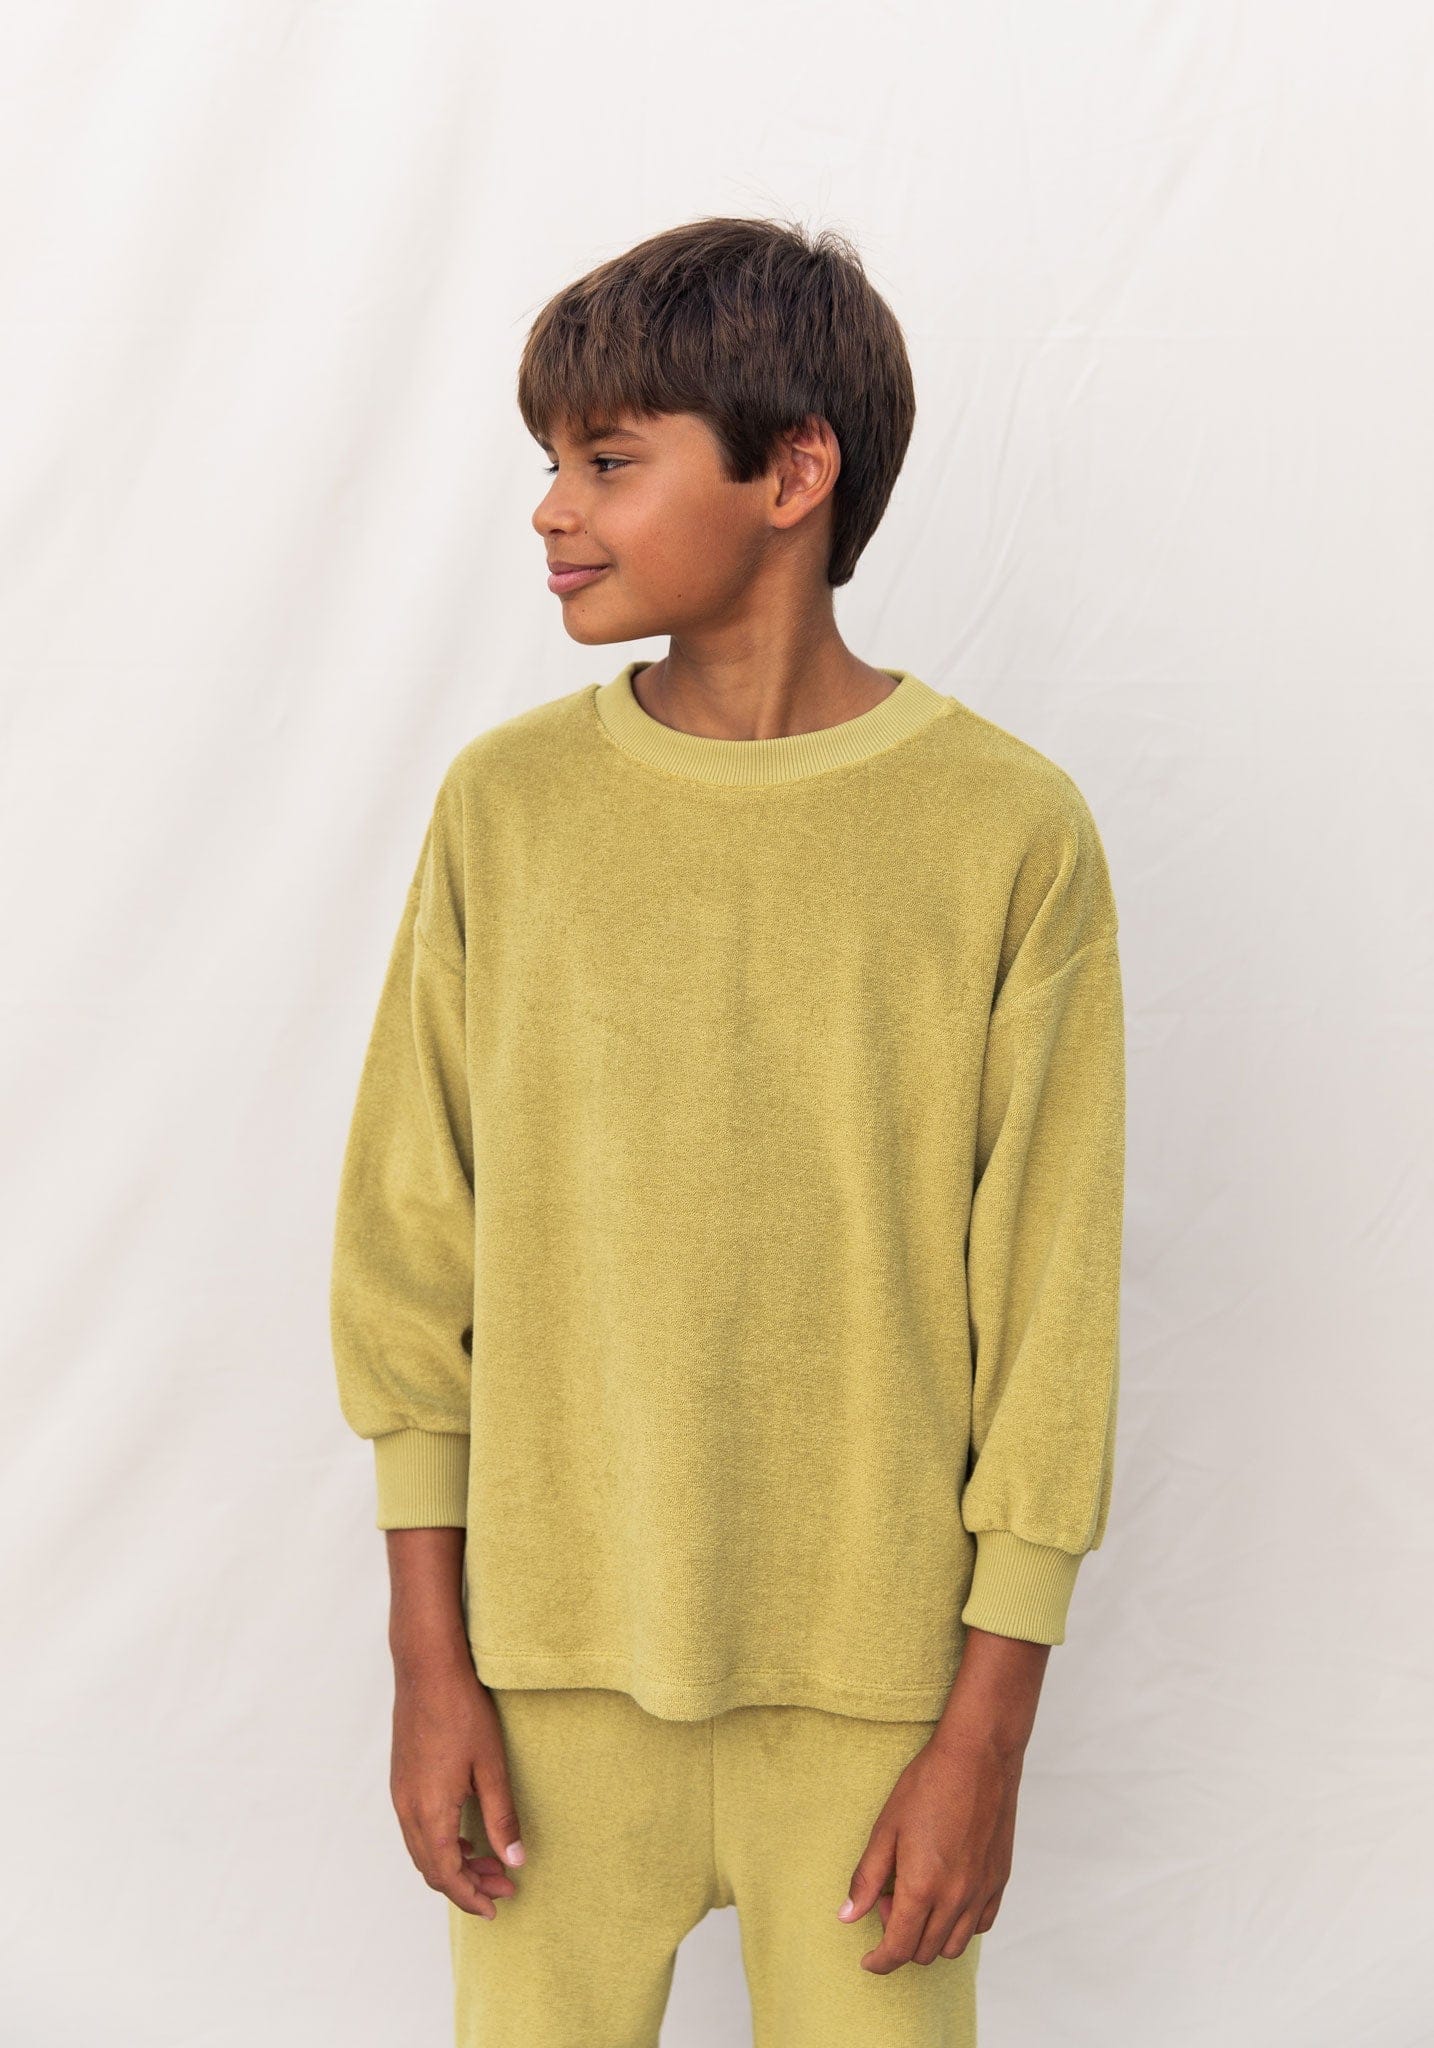 Sweatshirt terry din bumbac - Leaf Monkind HipHip.ro